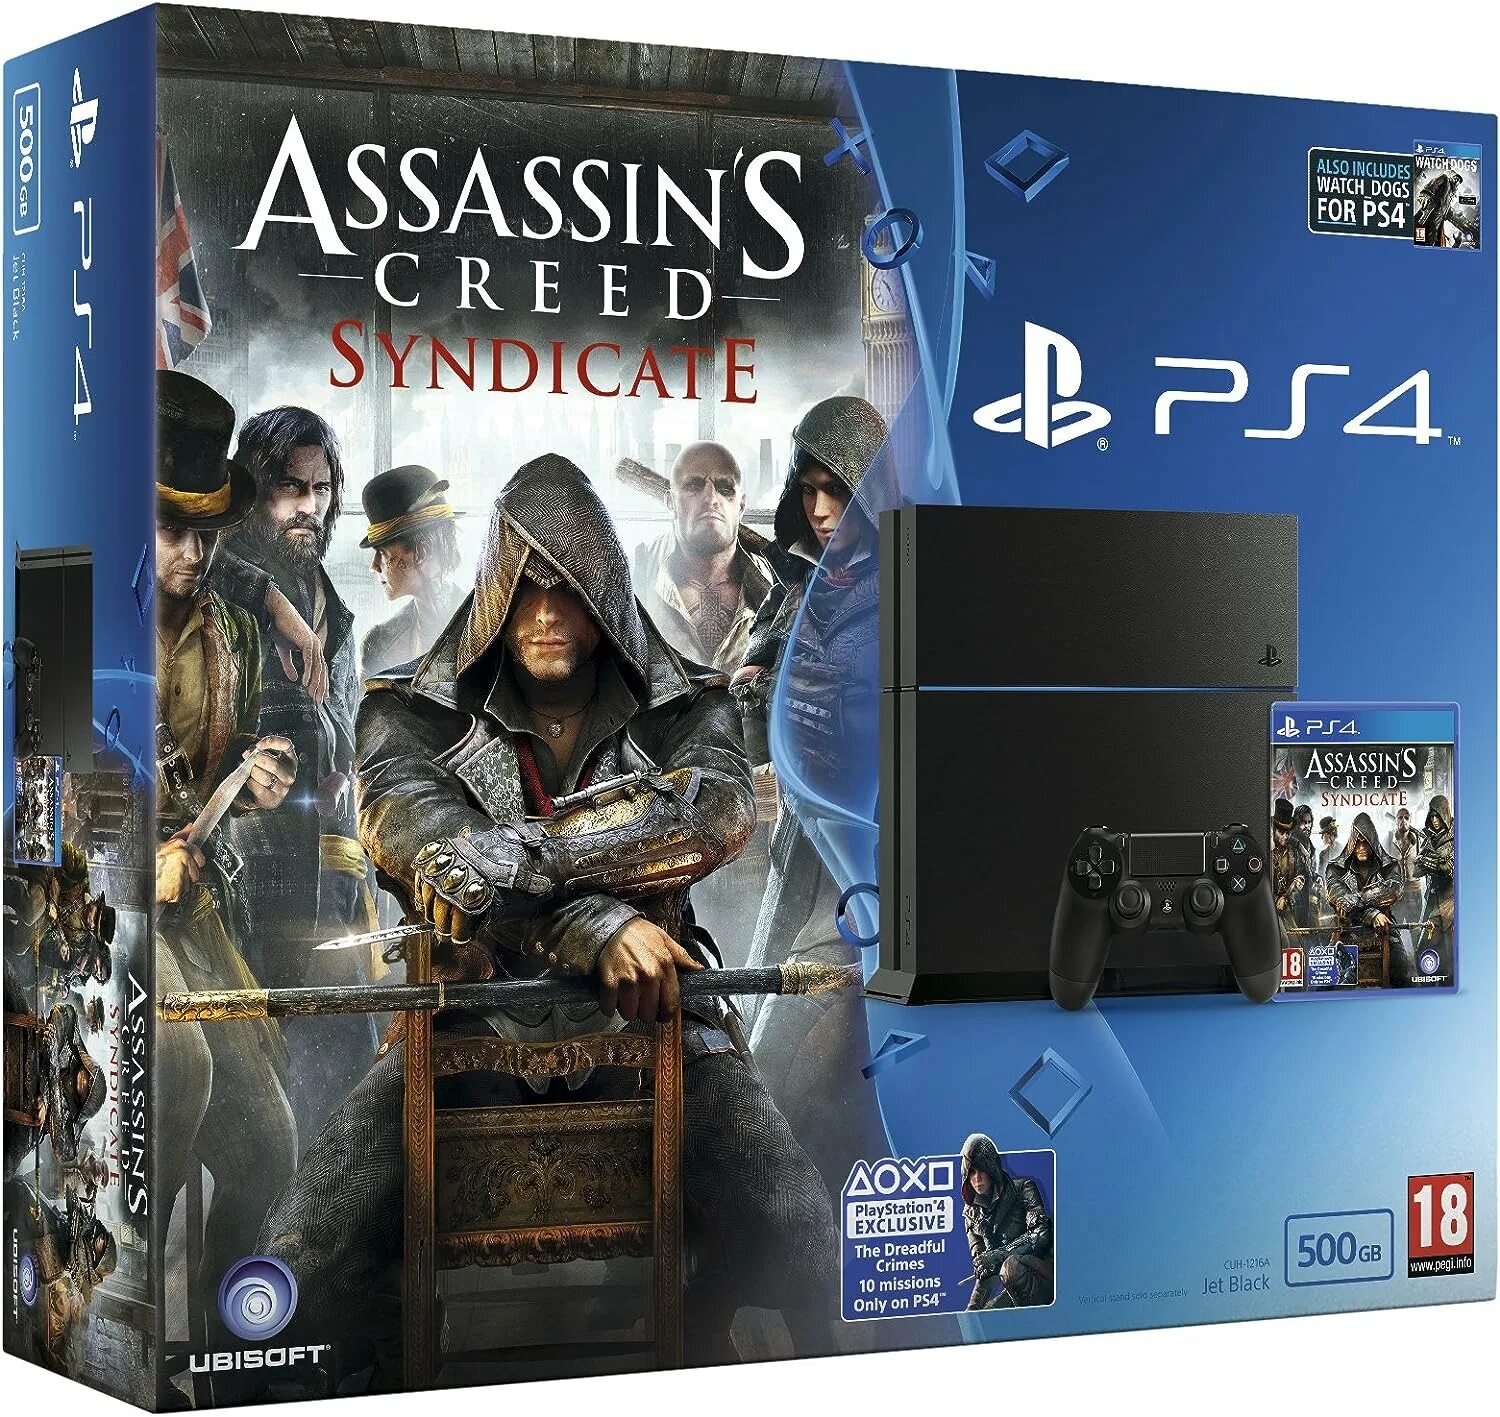 Ps4 диск Assassins Creed 1. PLAYSTATION 4 диски ассасин 2. Ассасин Крид Синдикат диск ПС 4. Assassin's Creed Синдикат ps4 диск. Ps4 игры 7